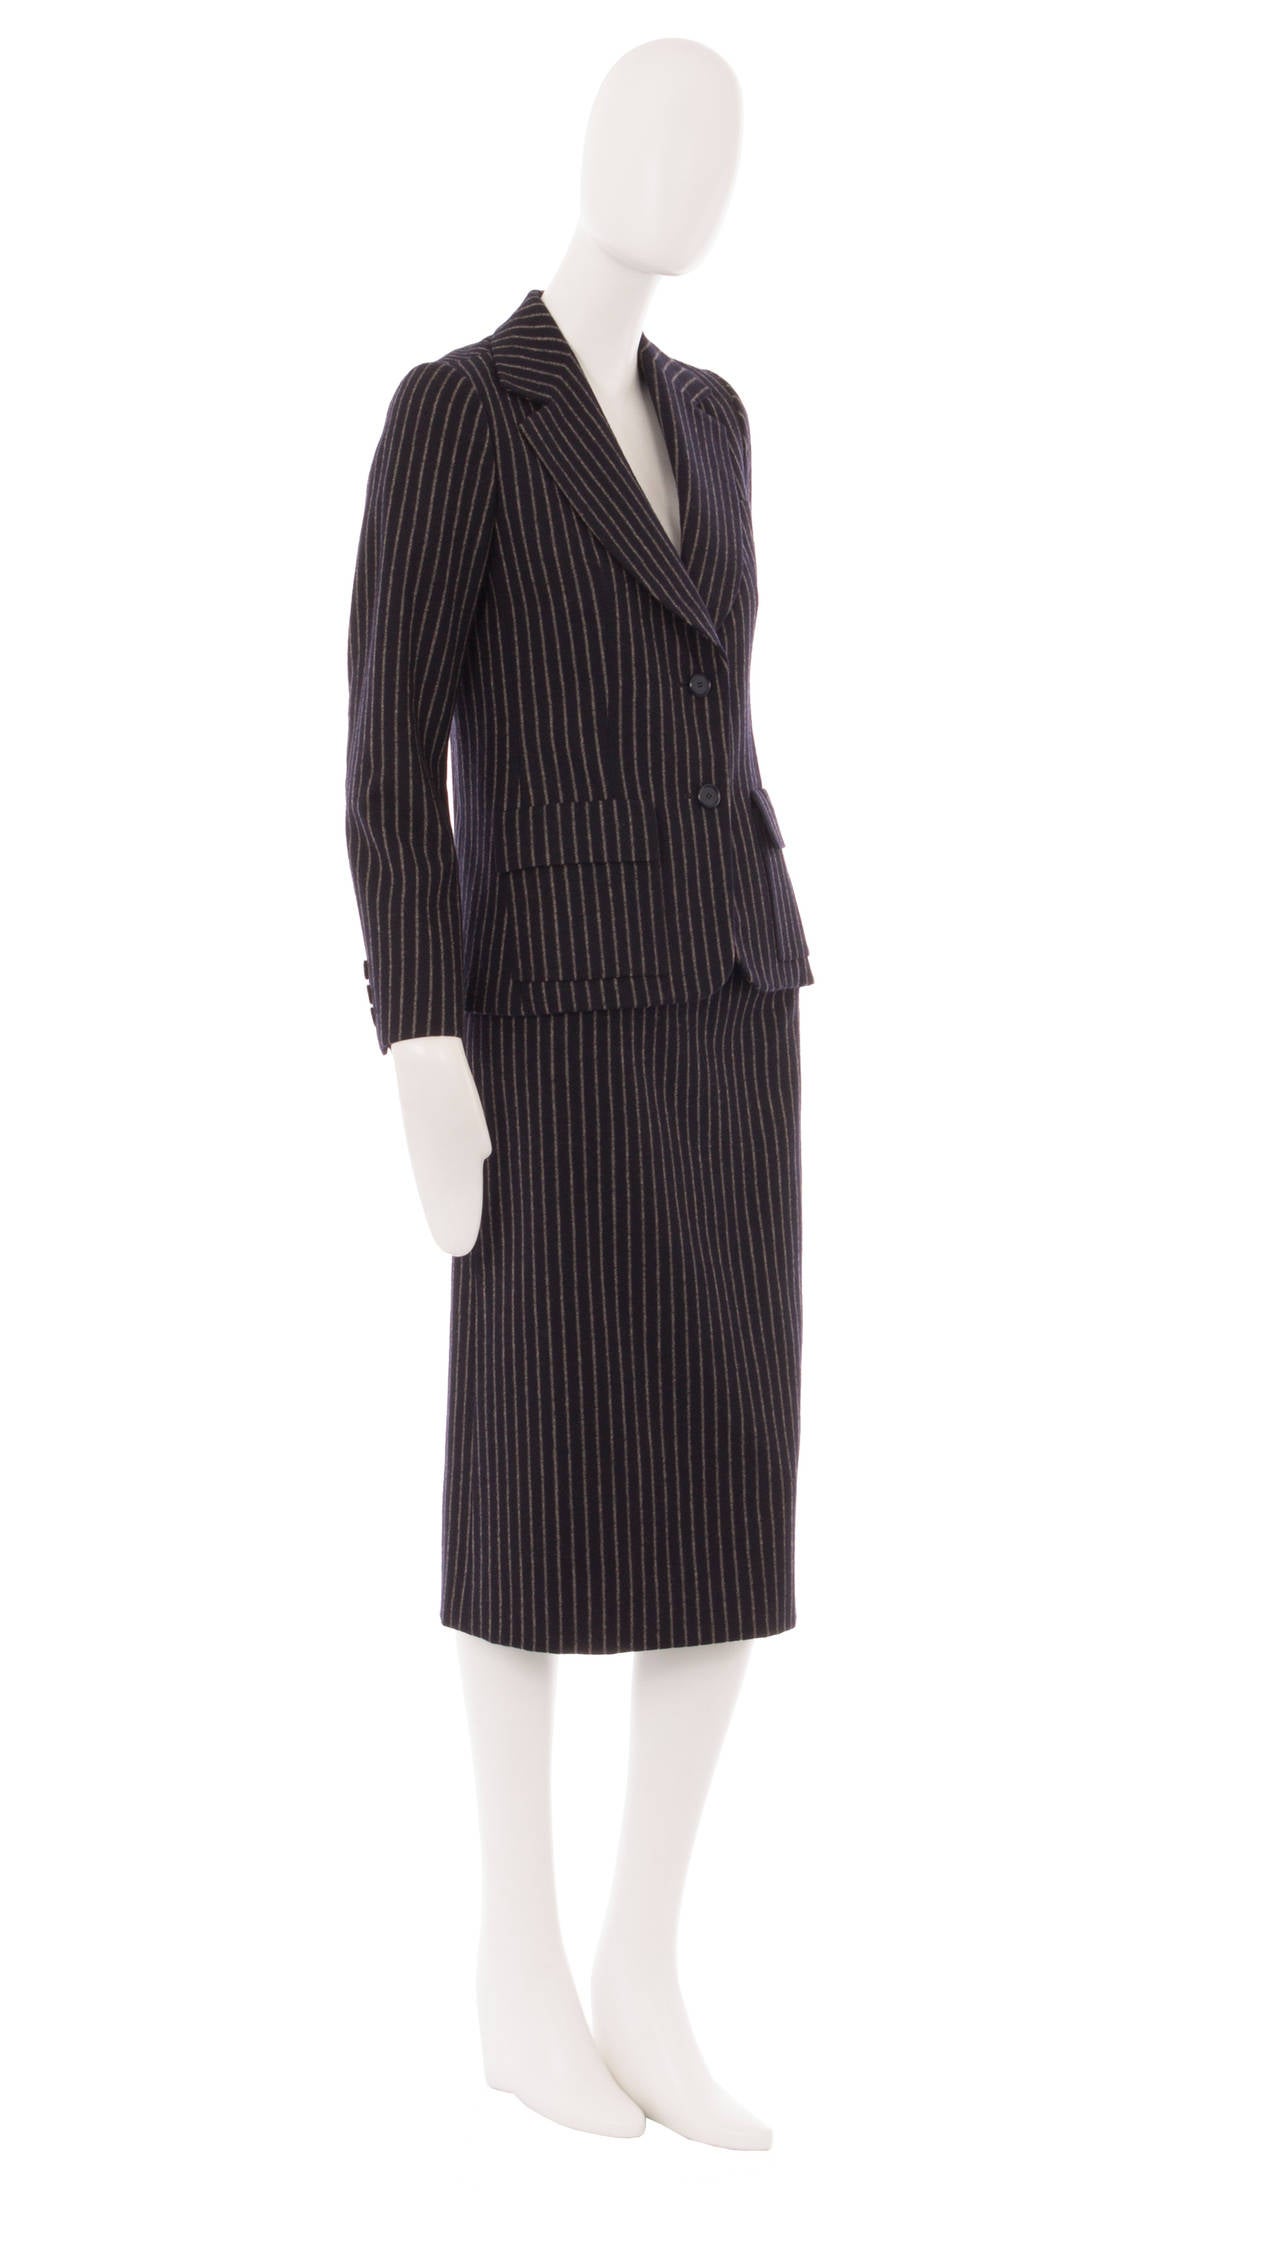 The perfect choice for the office, this Dior skirt suit, constructed from navy wool with an ivory pinstripe, is beautifully cut. The jacket features a double collar, buttons on the waist and outside pockets on the hips, while the skirt fastens with